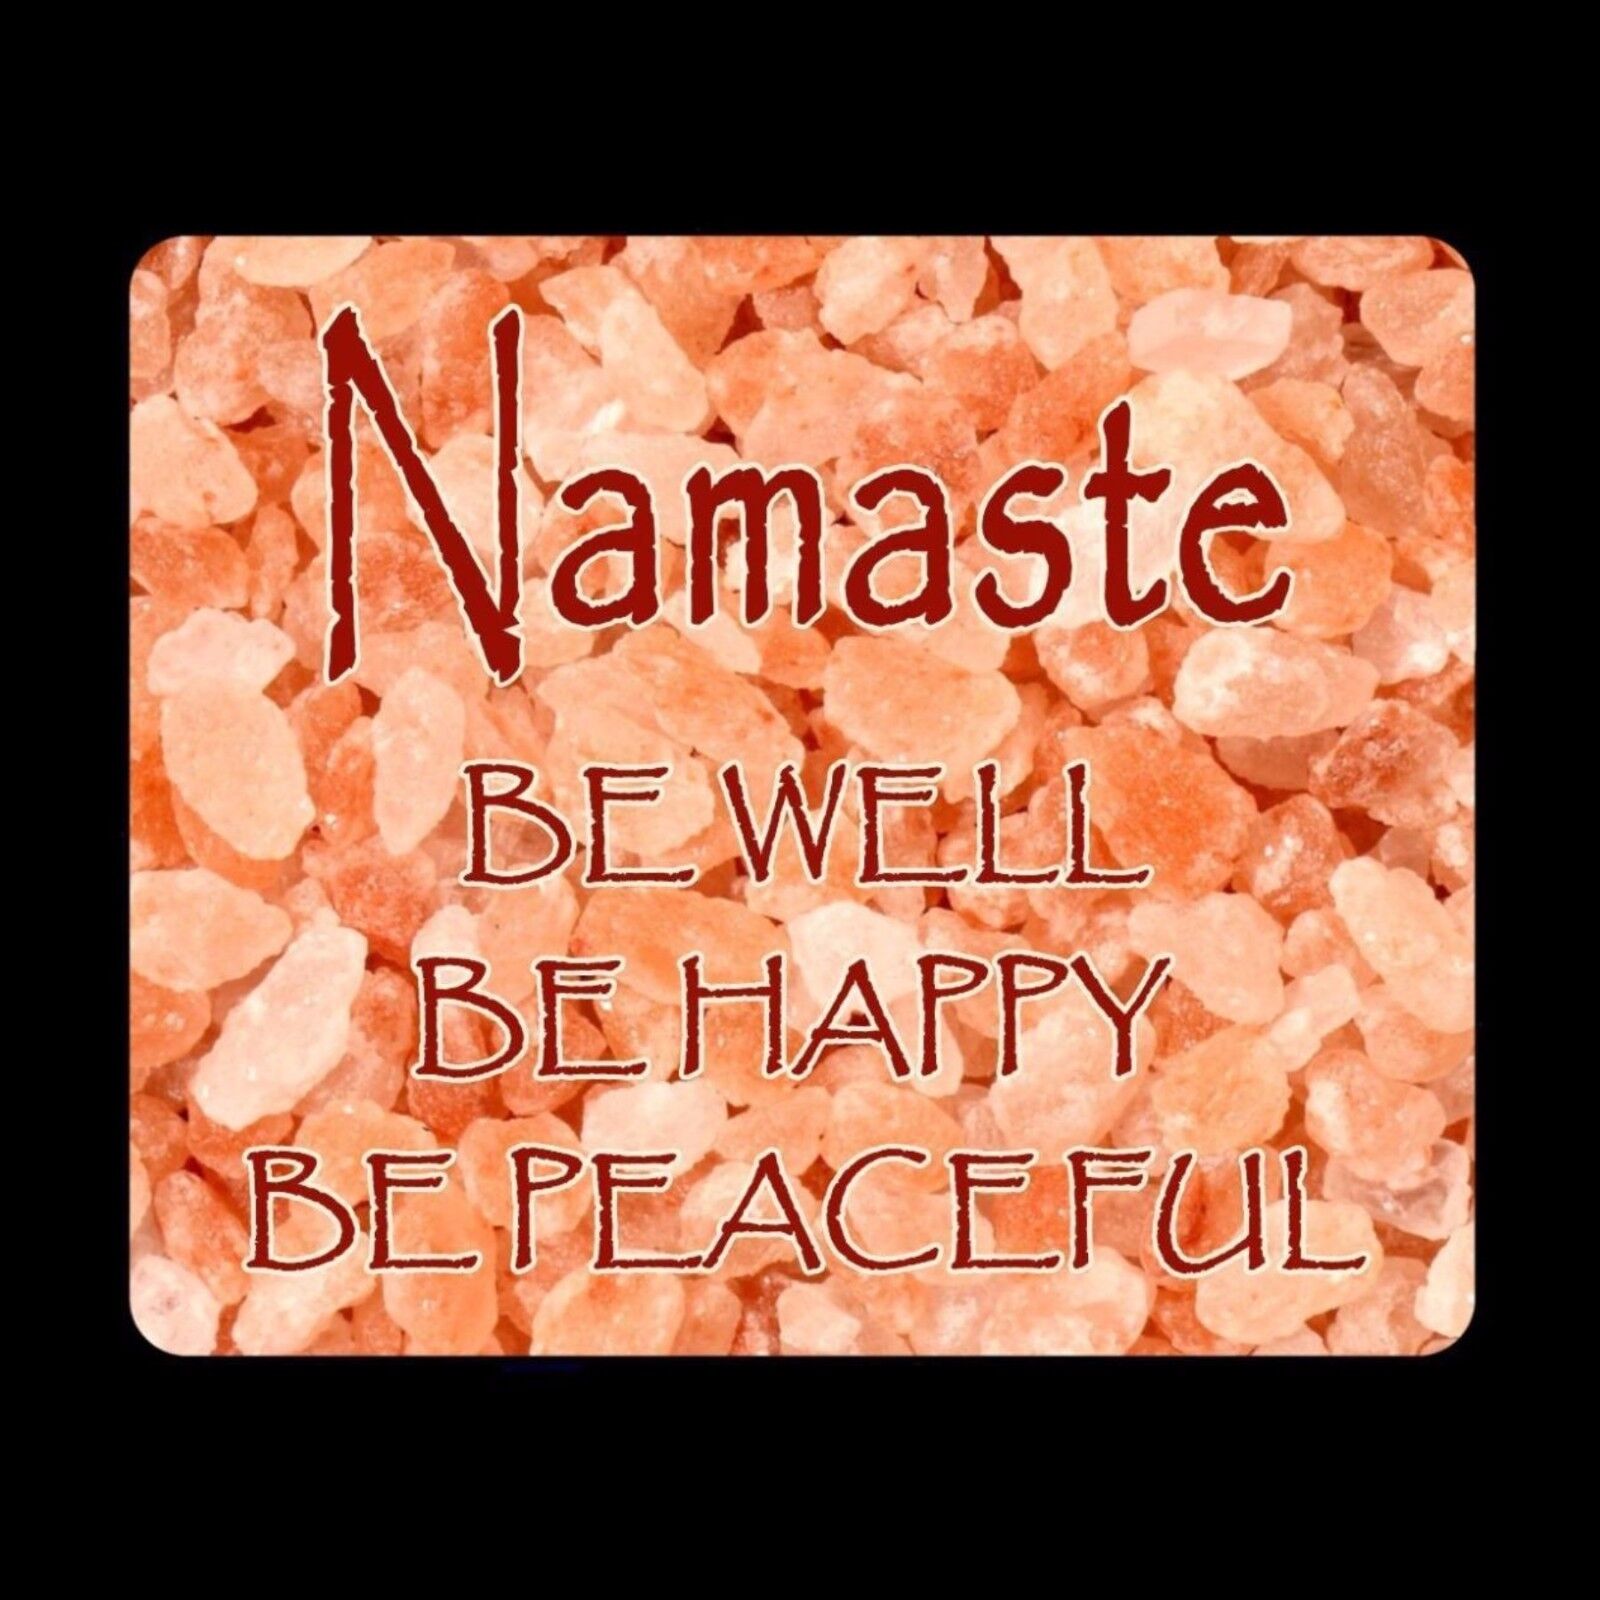 Namaste Be Well, Be Happy, Be Peaceful Mouse Pad yoga reiki peace meditation P11